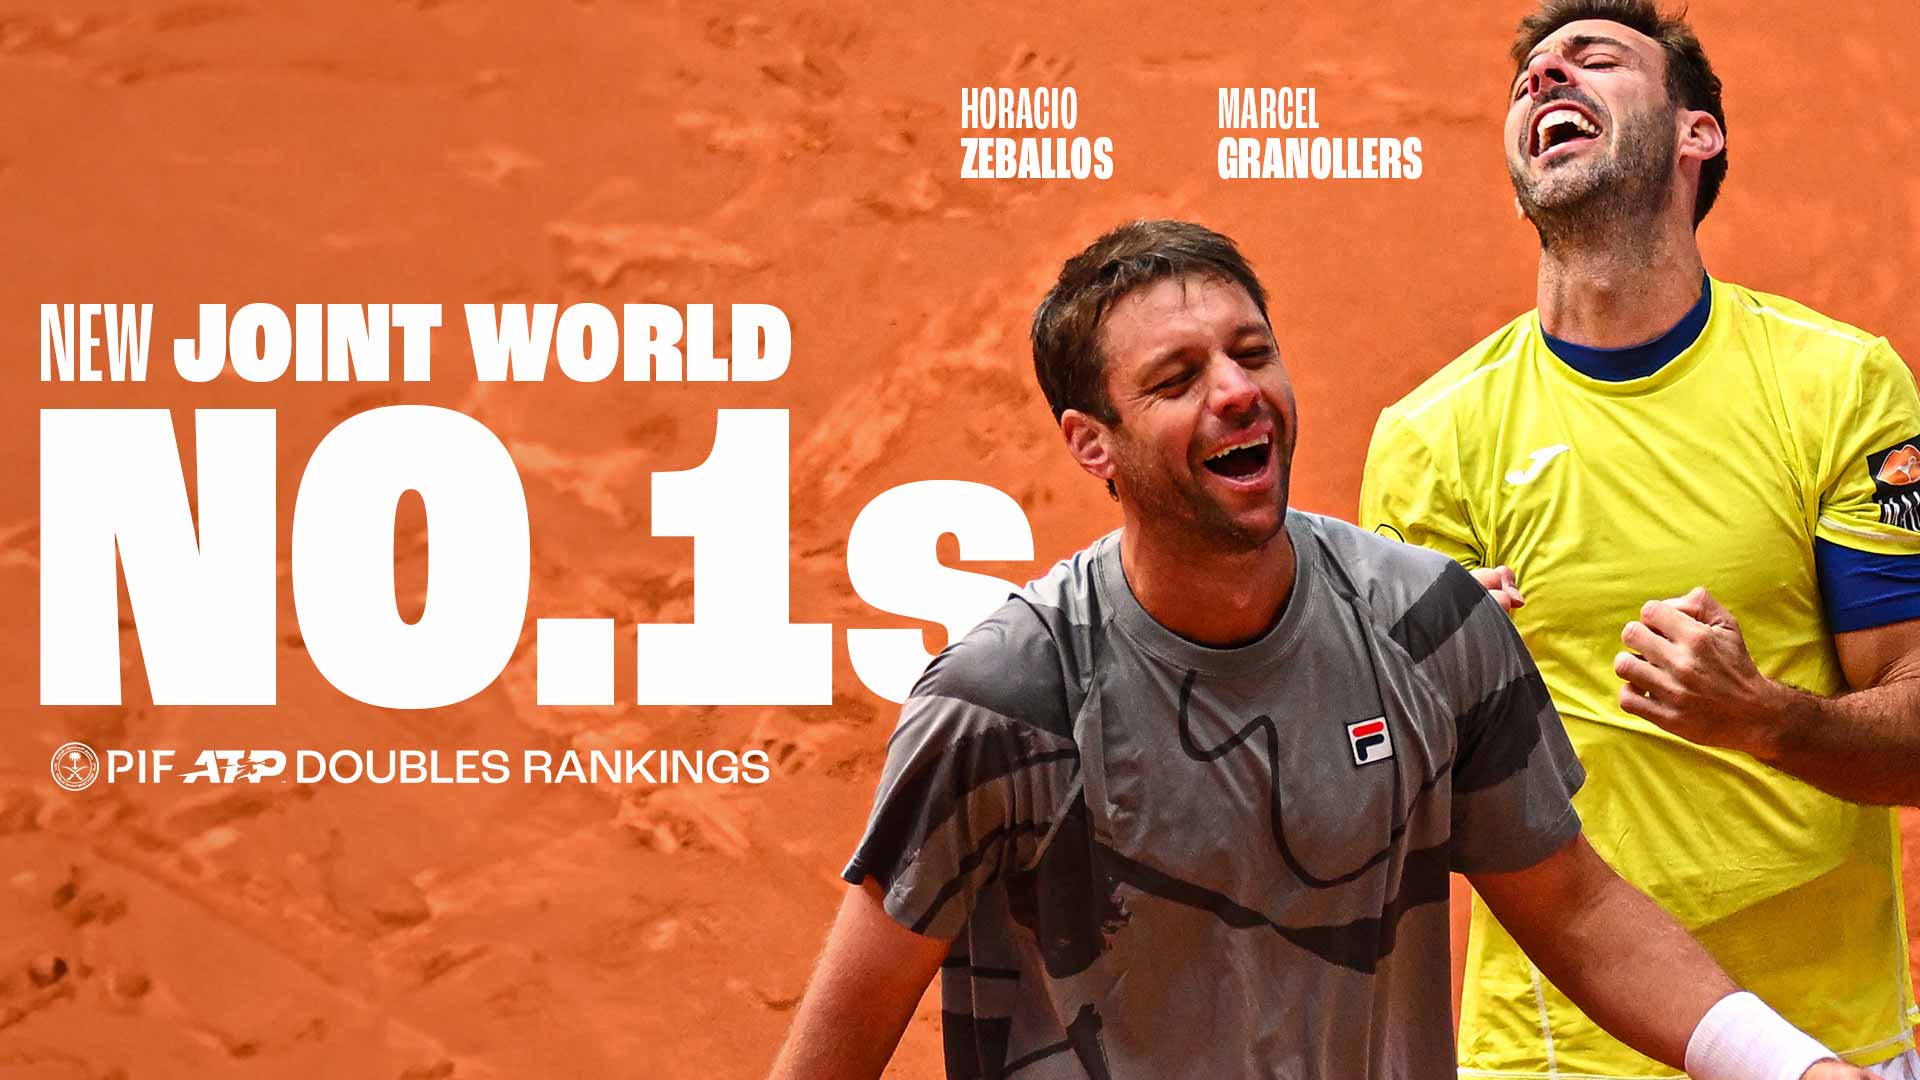 Horacio Zeballos (left) and Marcel Granollers are now joint-World No. 1s in the PIF ATP Doubles Rankings.